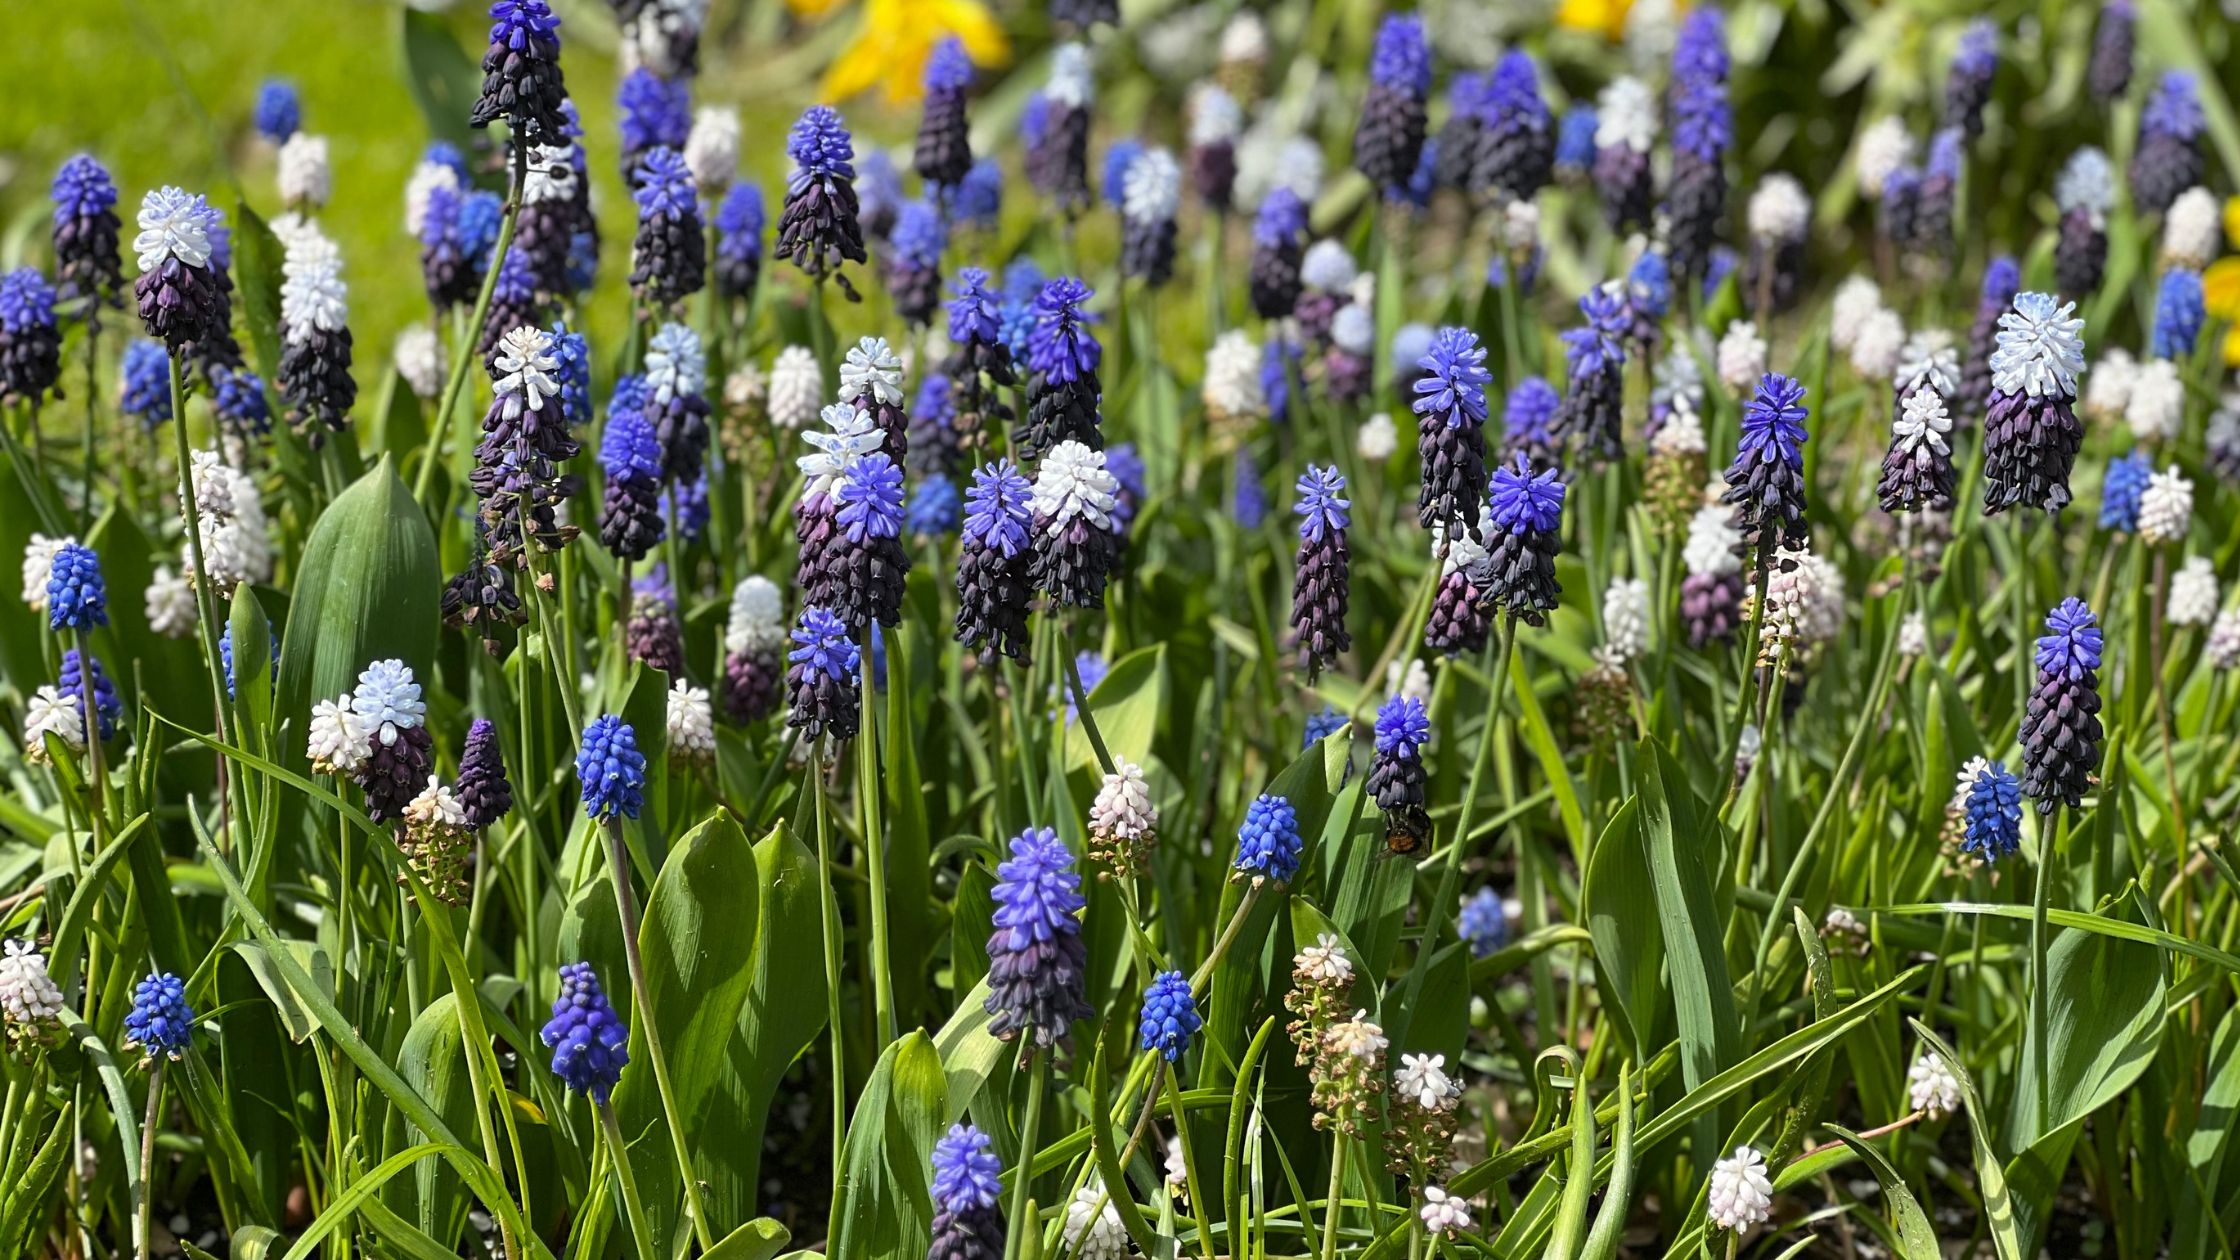 A group of dark blue and white muscari